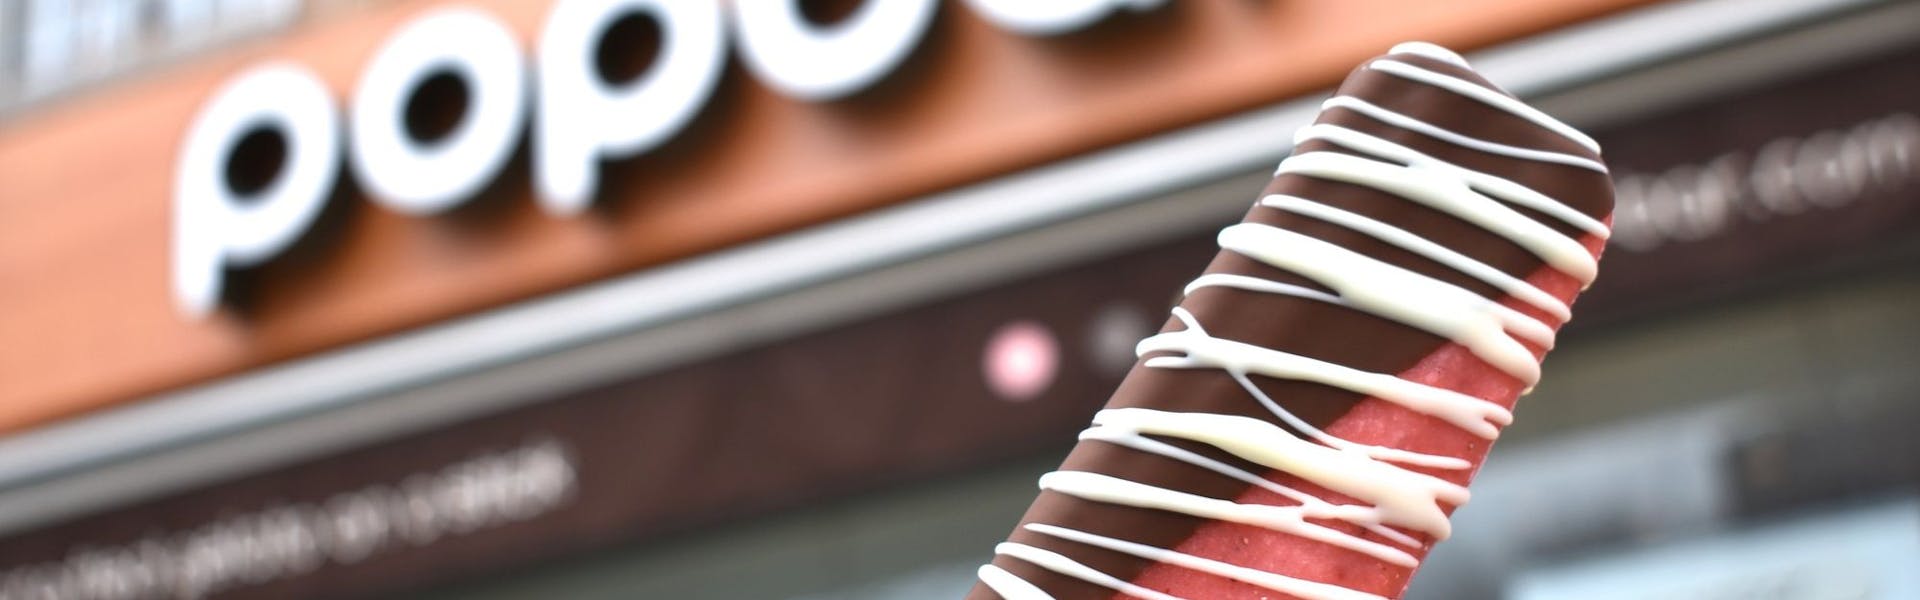 From High-End Fashion to Food: How Popbar Made Gelato on a Stick a Thing